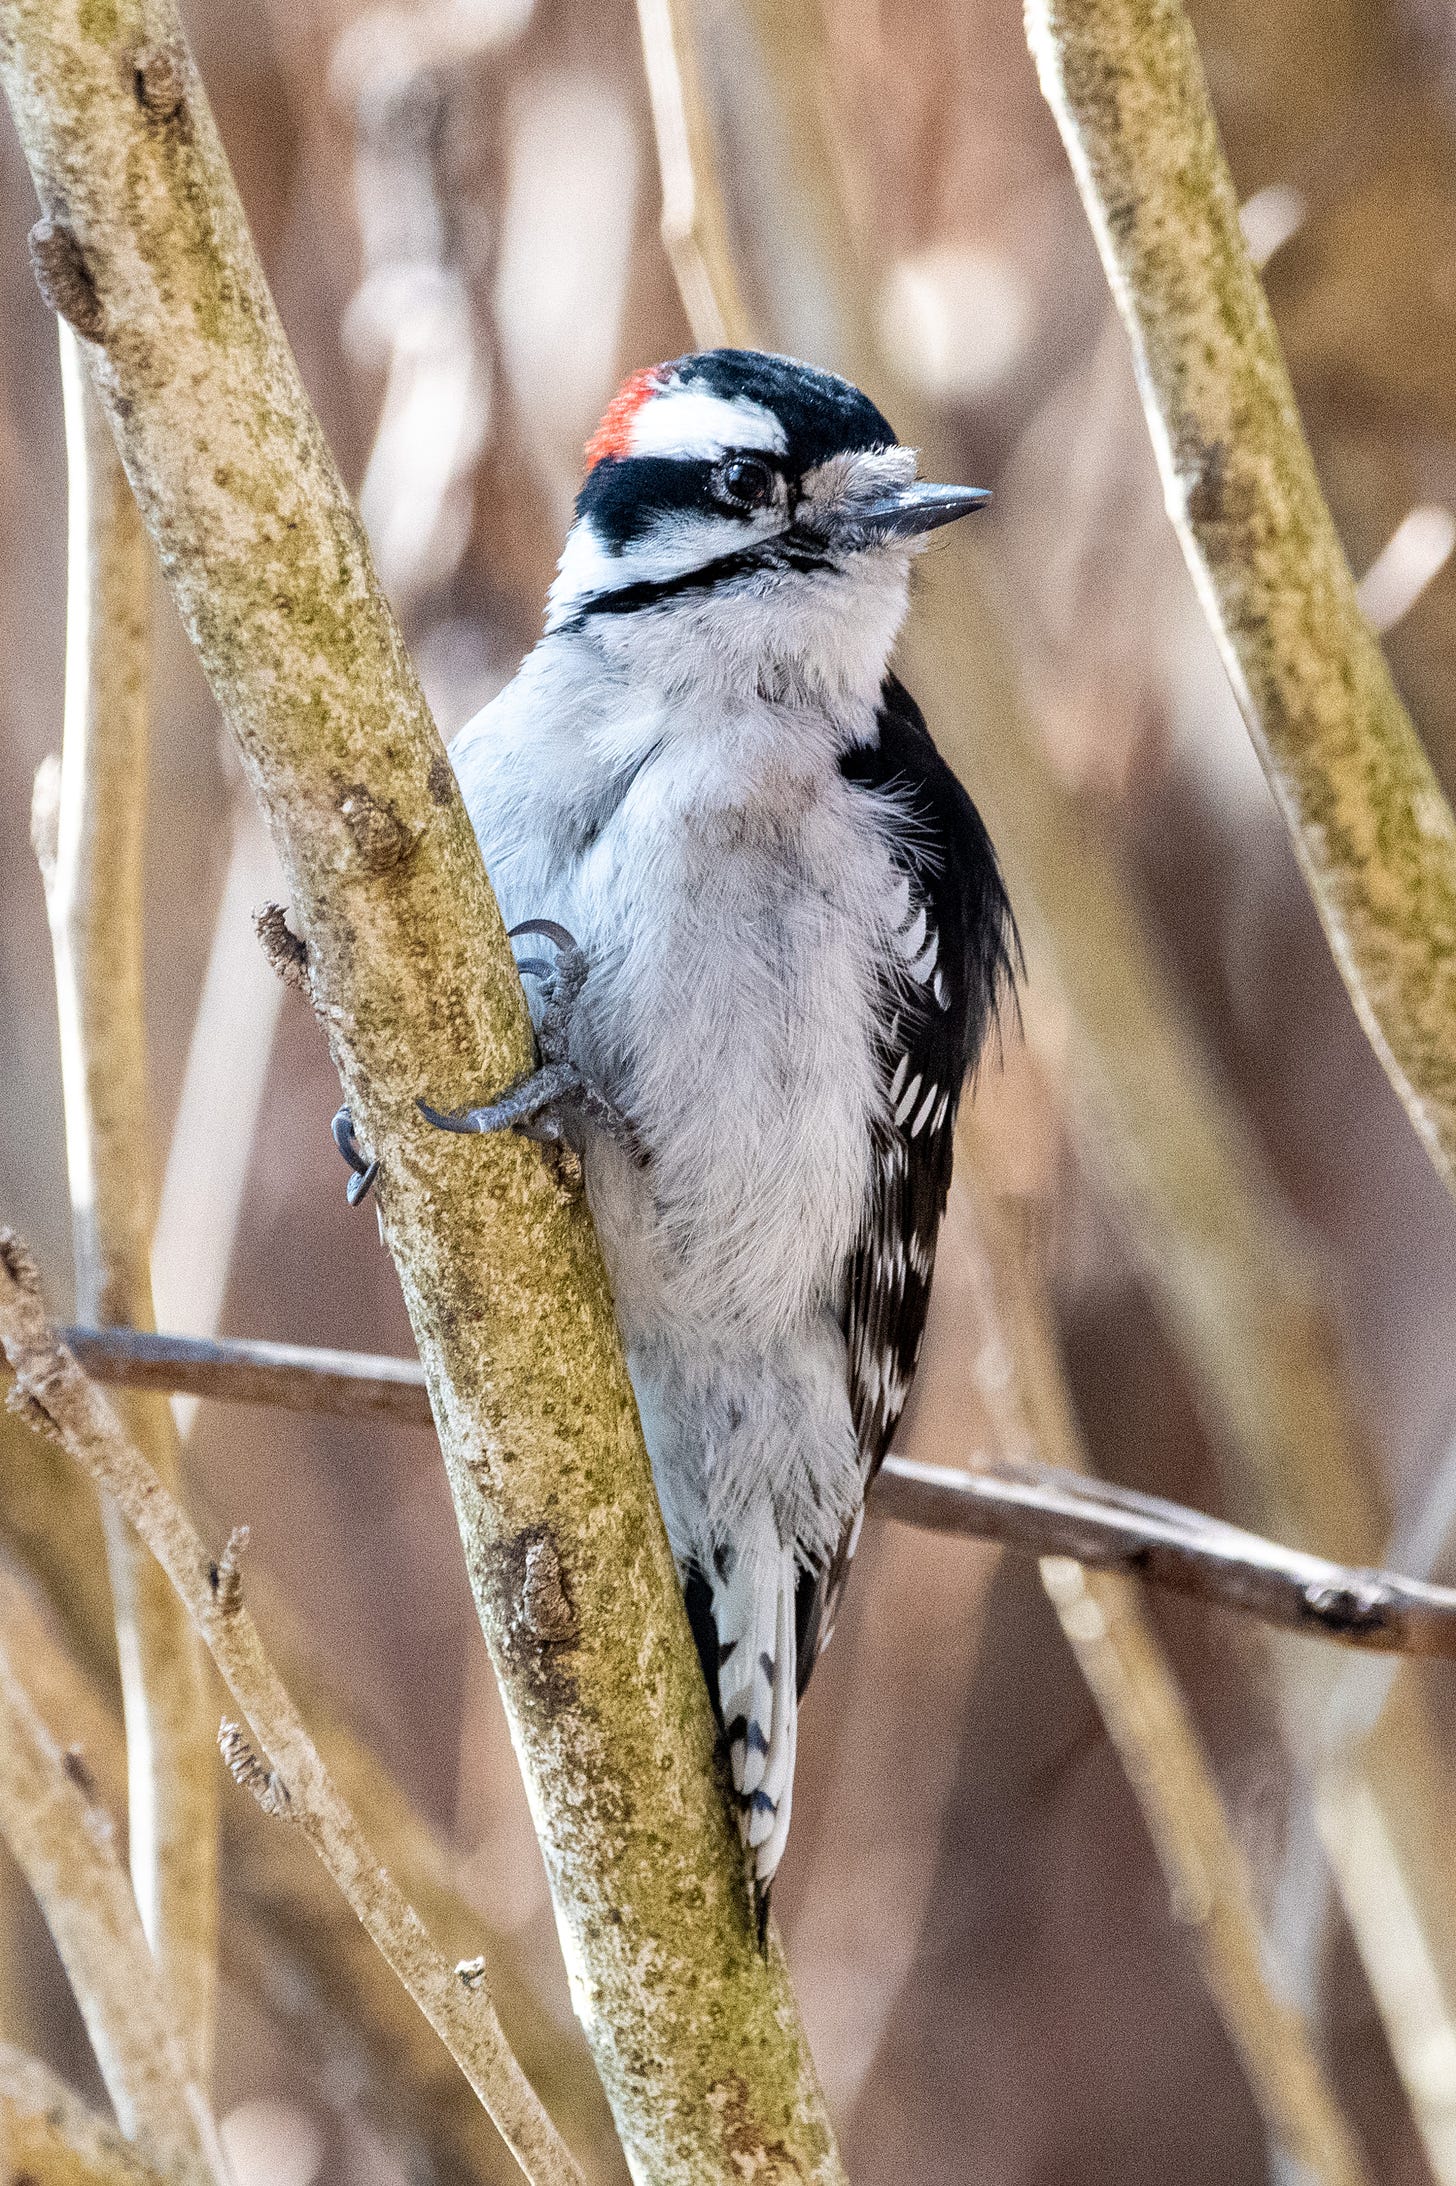 Downy woodpecker gripping a narrow tree trunk, looking to the side